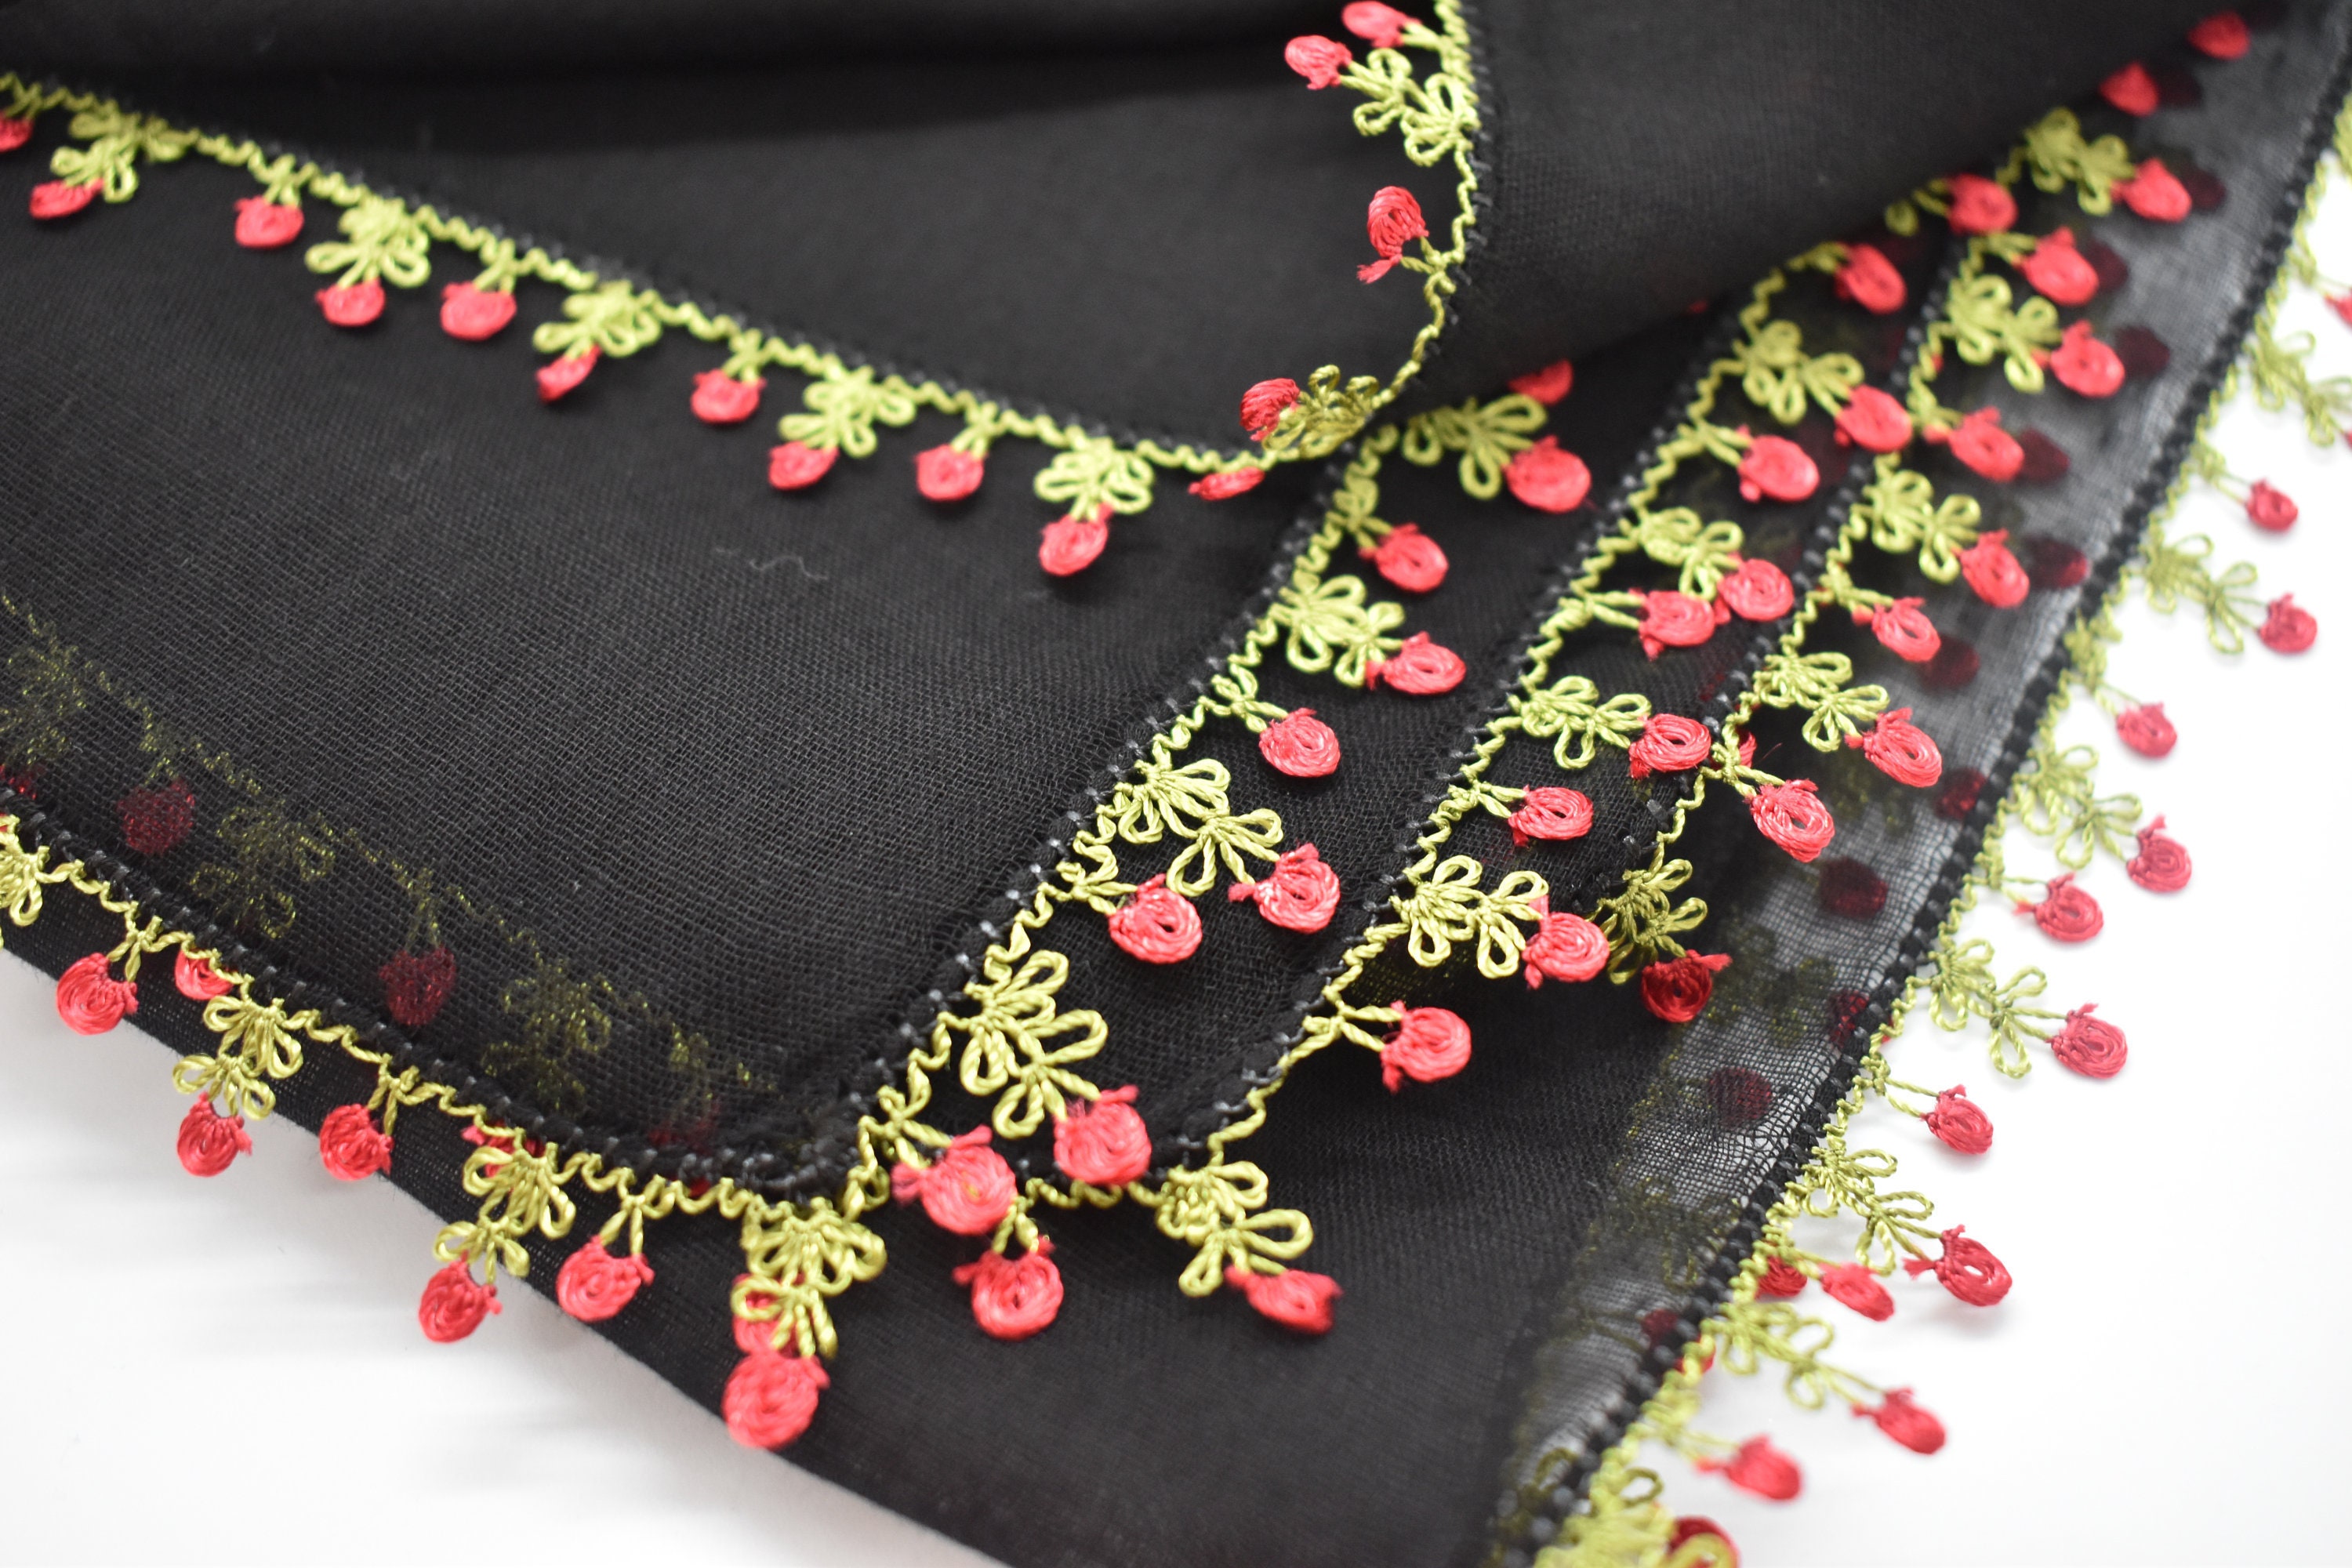 Black Red Cotton Scarves Cherry RedCherry Lace Oya Black Cotton Scarf Cotton embroidery scarf GiftsForHer Emboridery Cotton Shawl Wrap